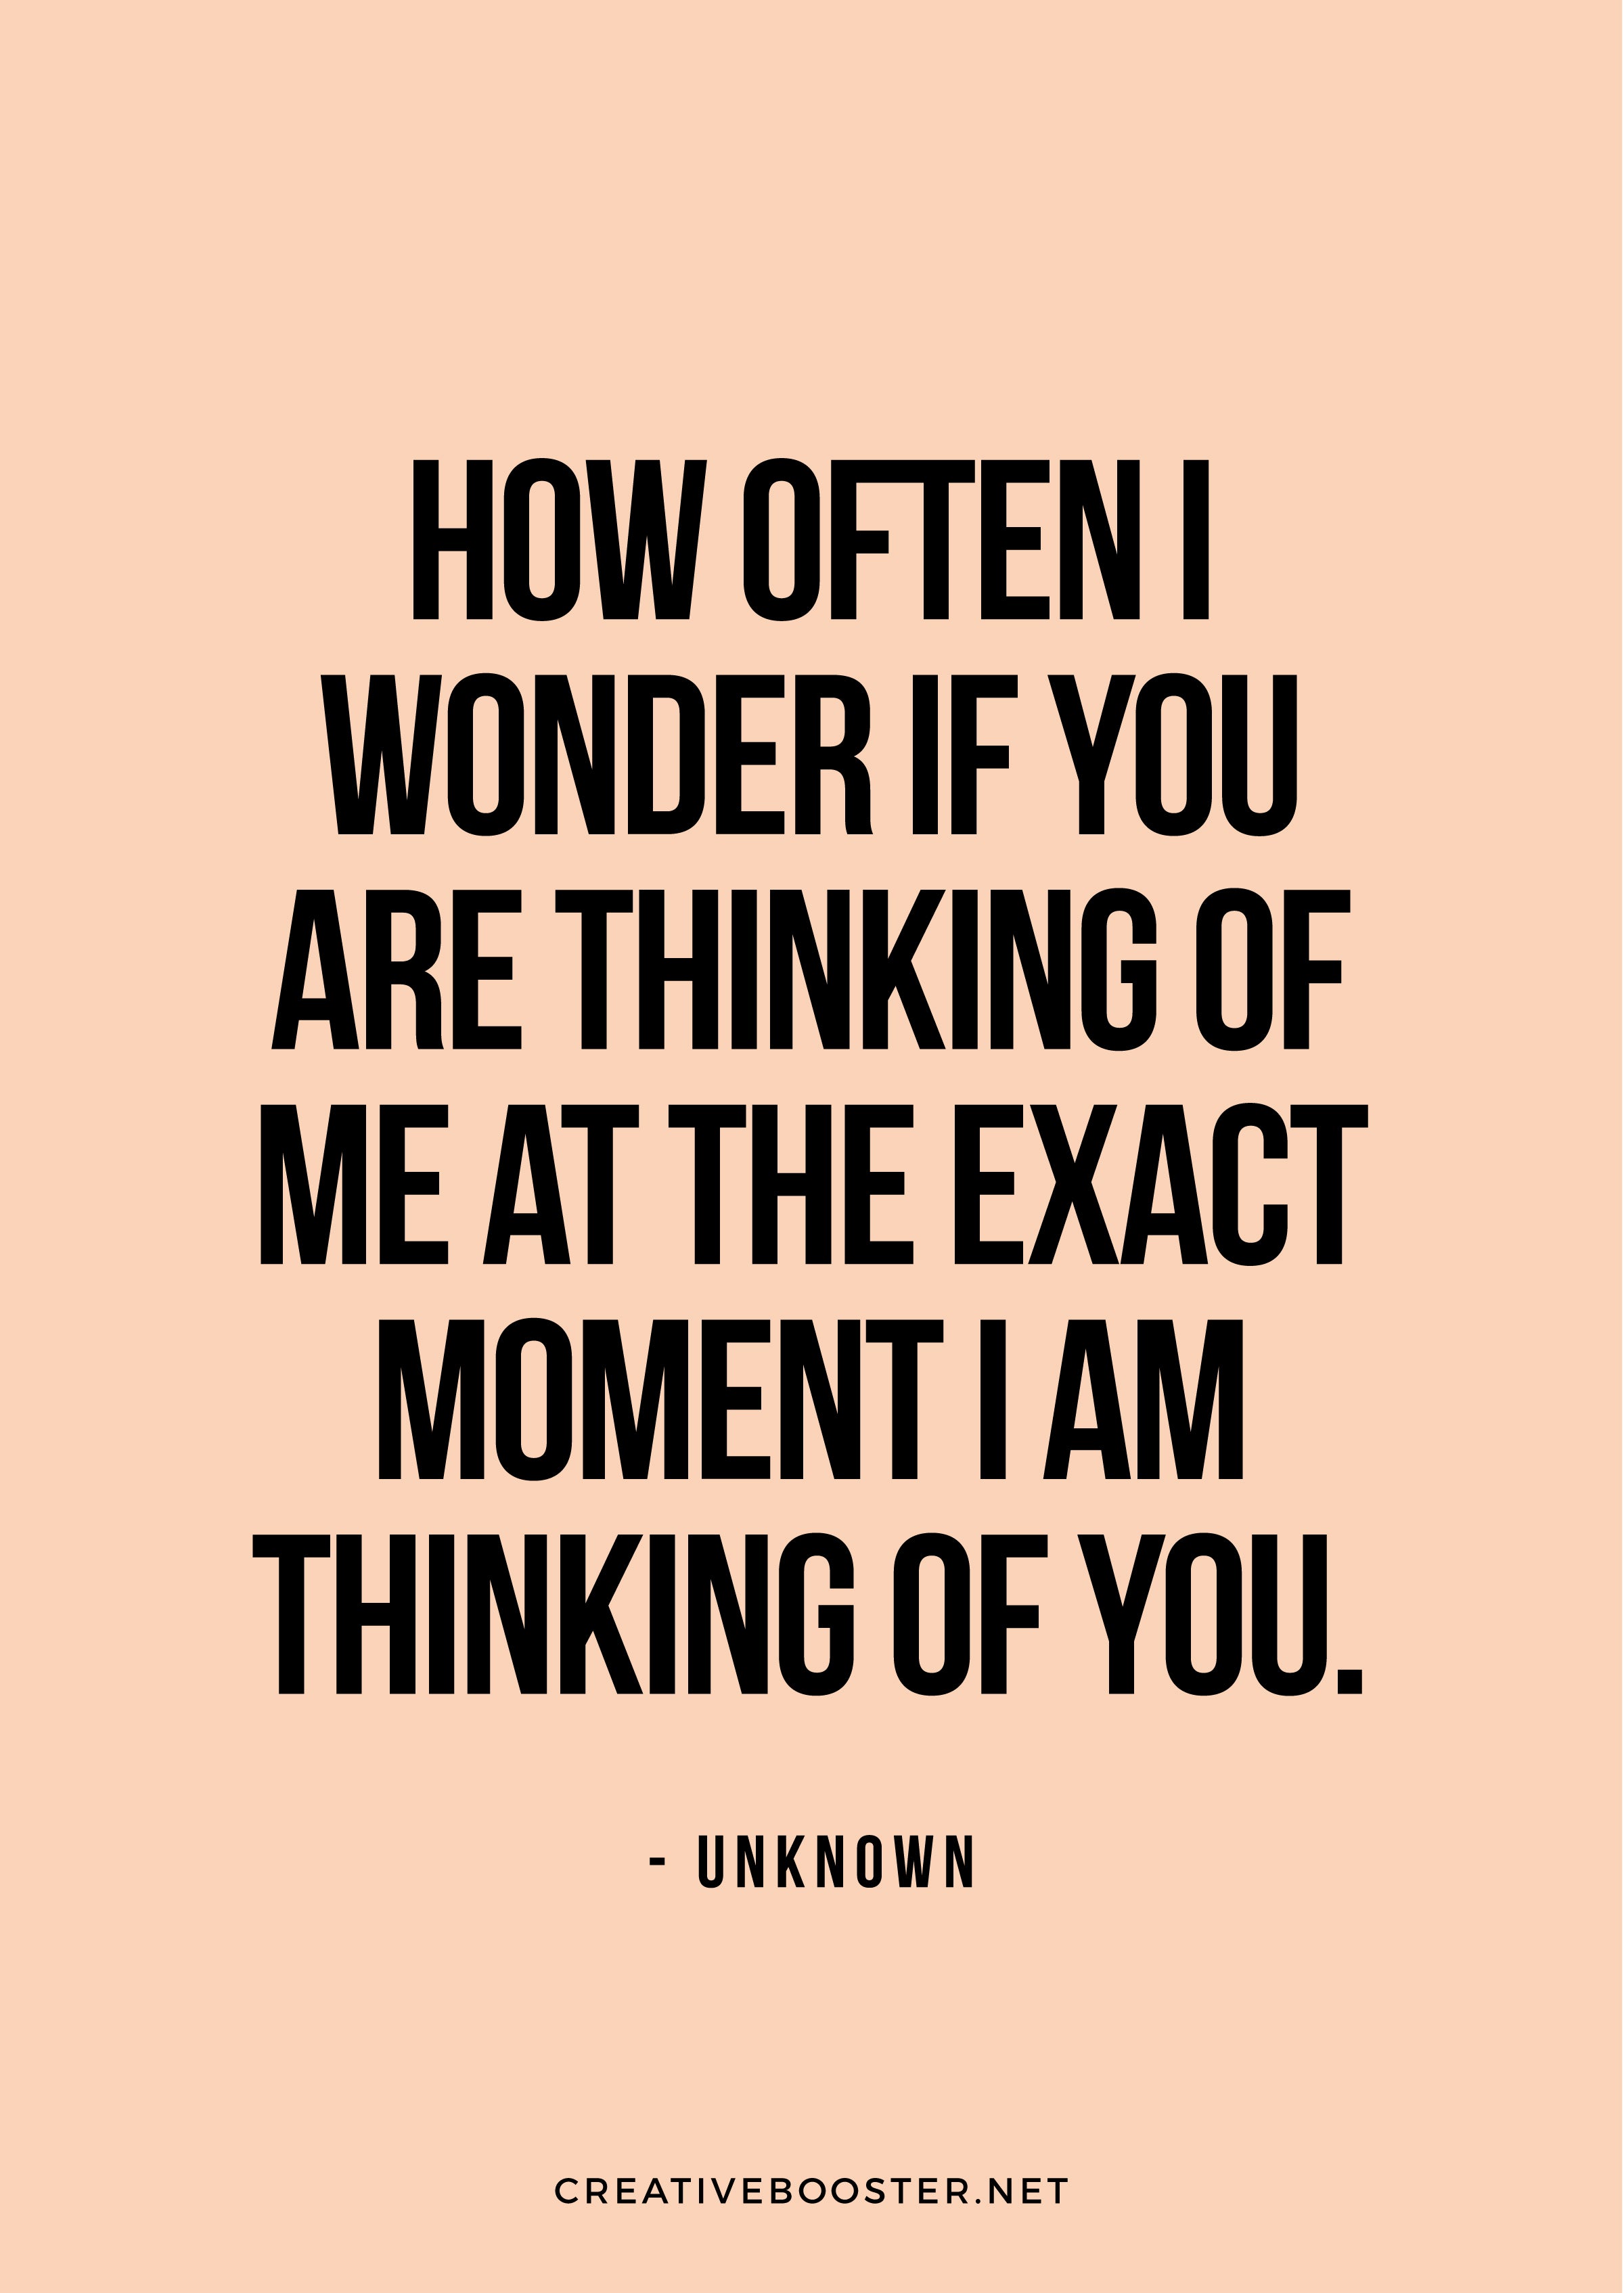 "How often I wonder if you are thinking of me at the exact moment I am thinking of you." — Unknown